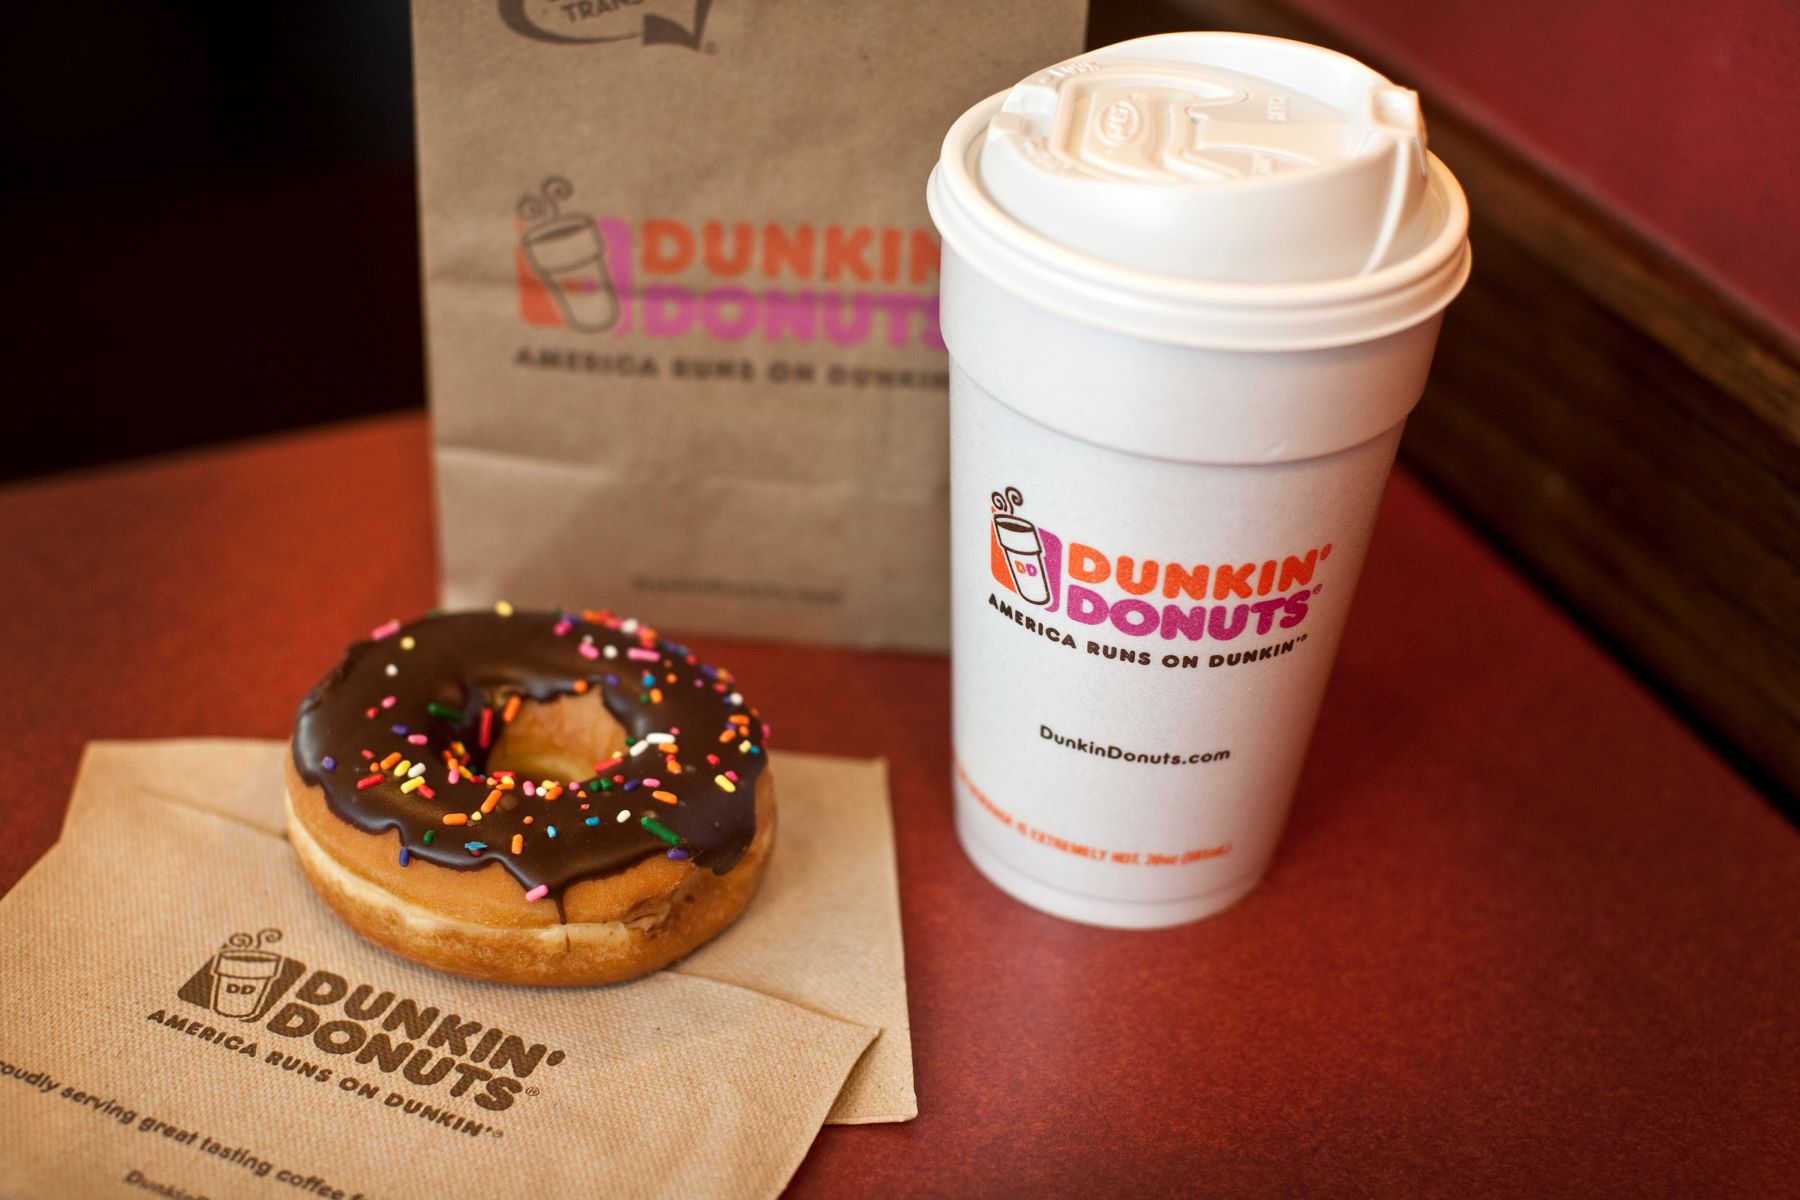 A Dunkin' Donuts donut, coffee, and bag inside a store in West Orange, New Jersey